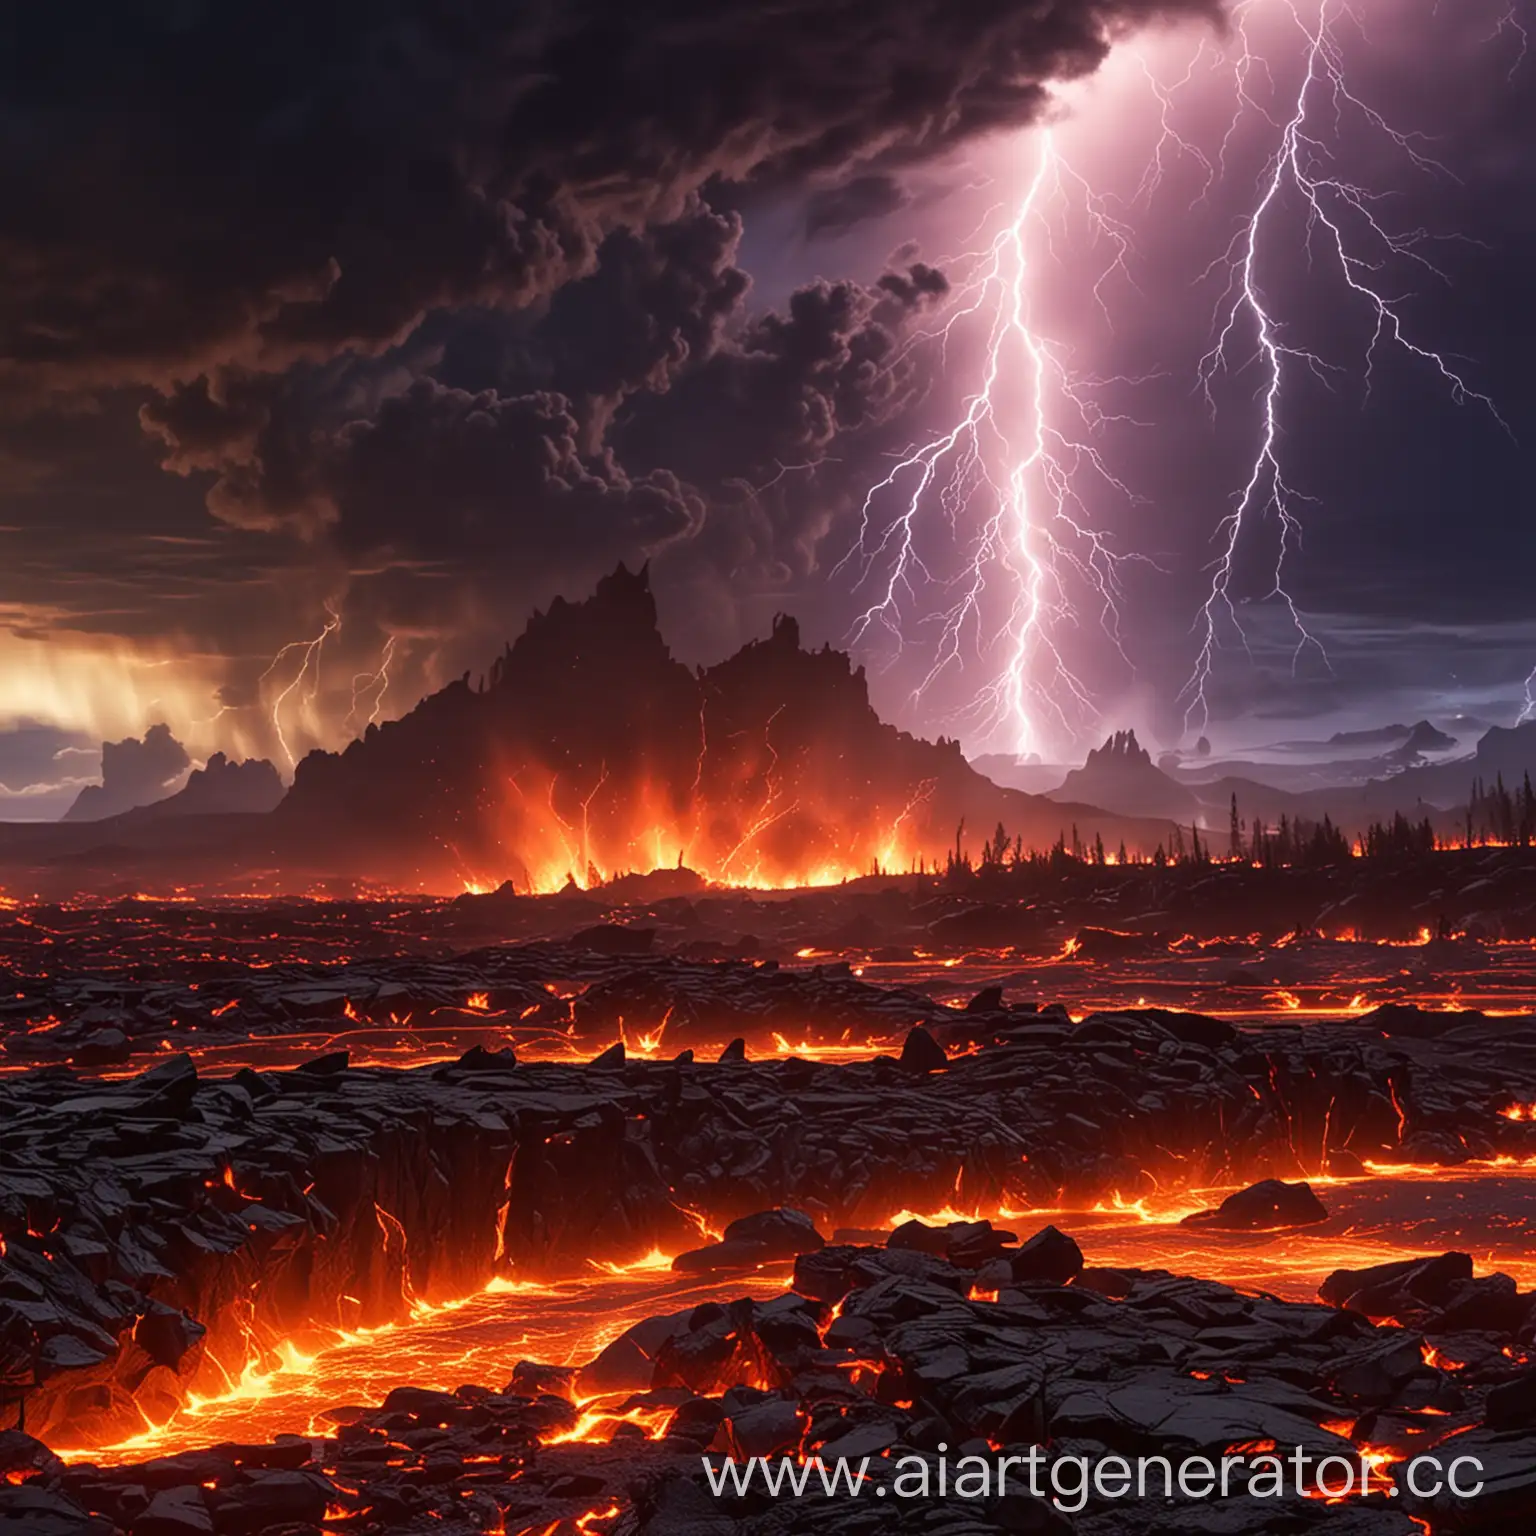 Apocalyptic-Earth-Catastrophe-Shattering-Continents-Amidst-Lava-and-Lightning